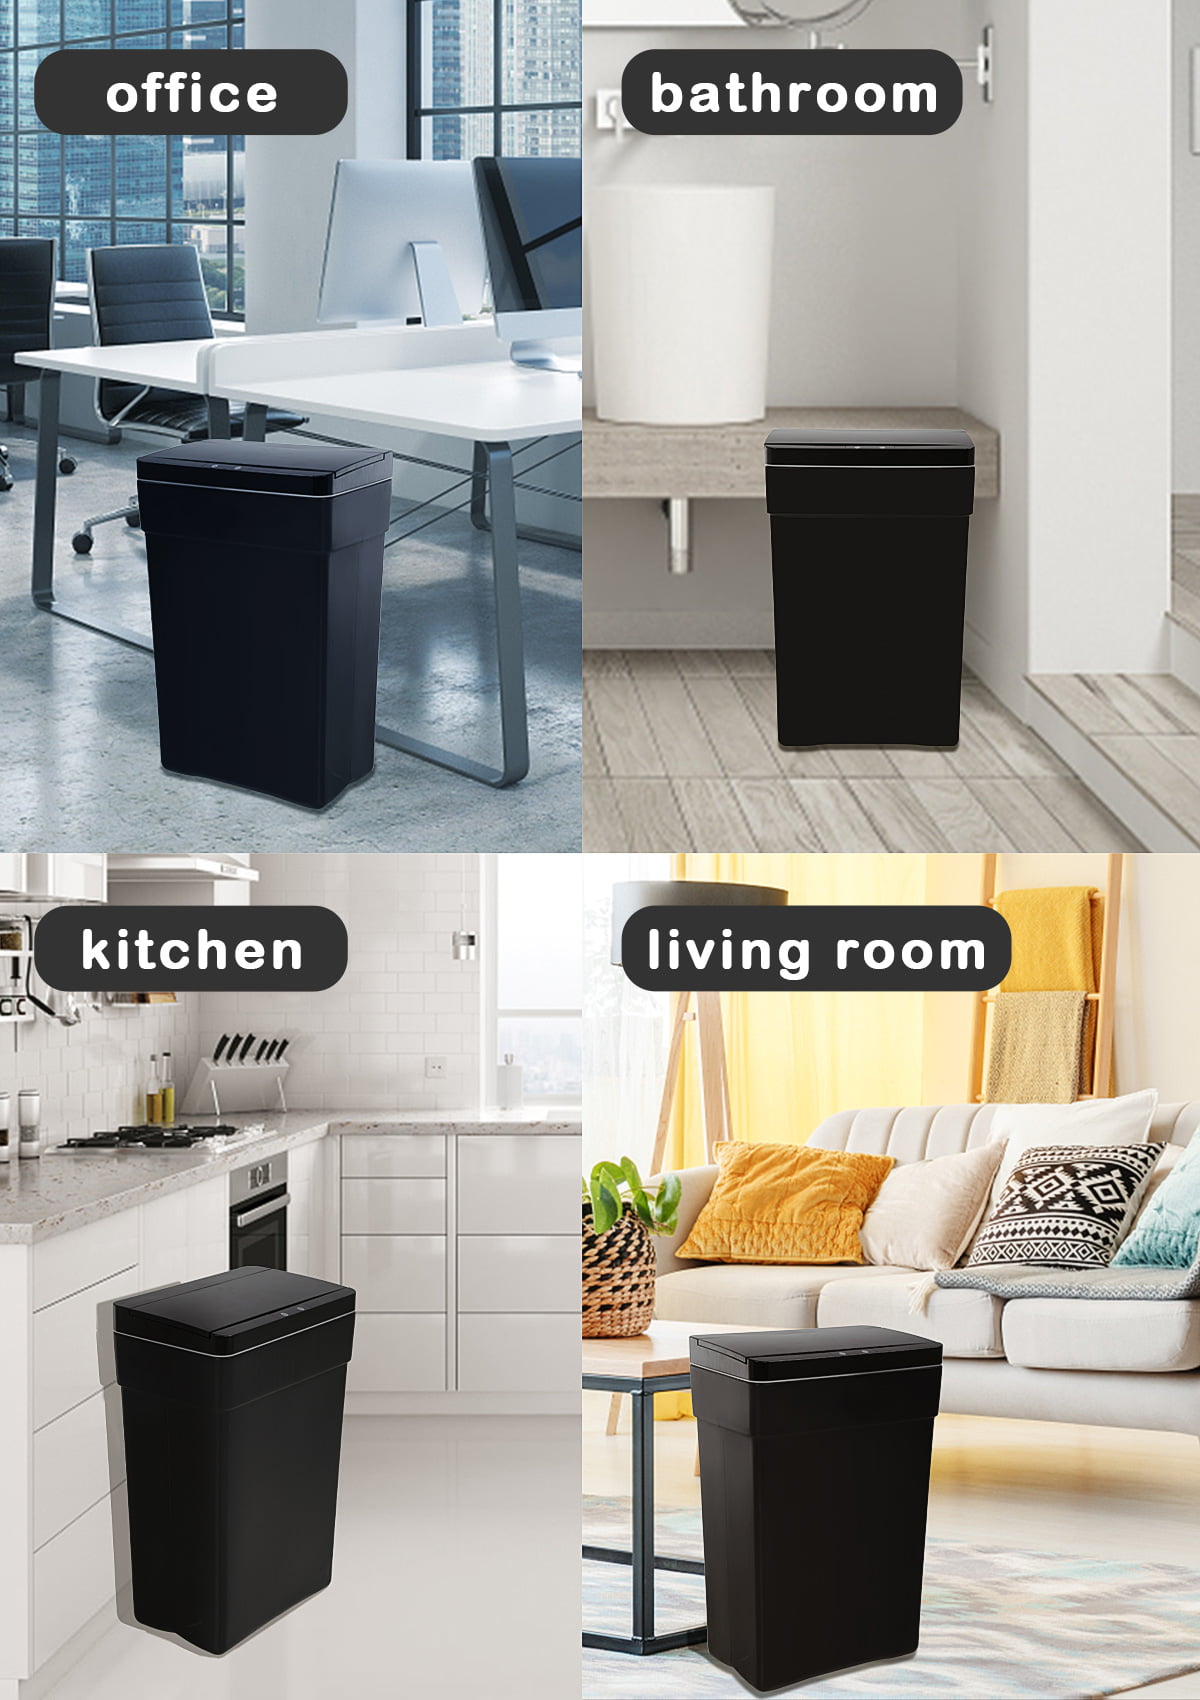 YRLLENSDAN Garbage Can 13 Gallon 50 Liter Kitchen Trash Can for Bathroom  Bedroom Home Office Automatic Touch Free High-Capacity with Lid Brushed